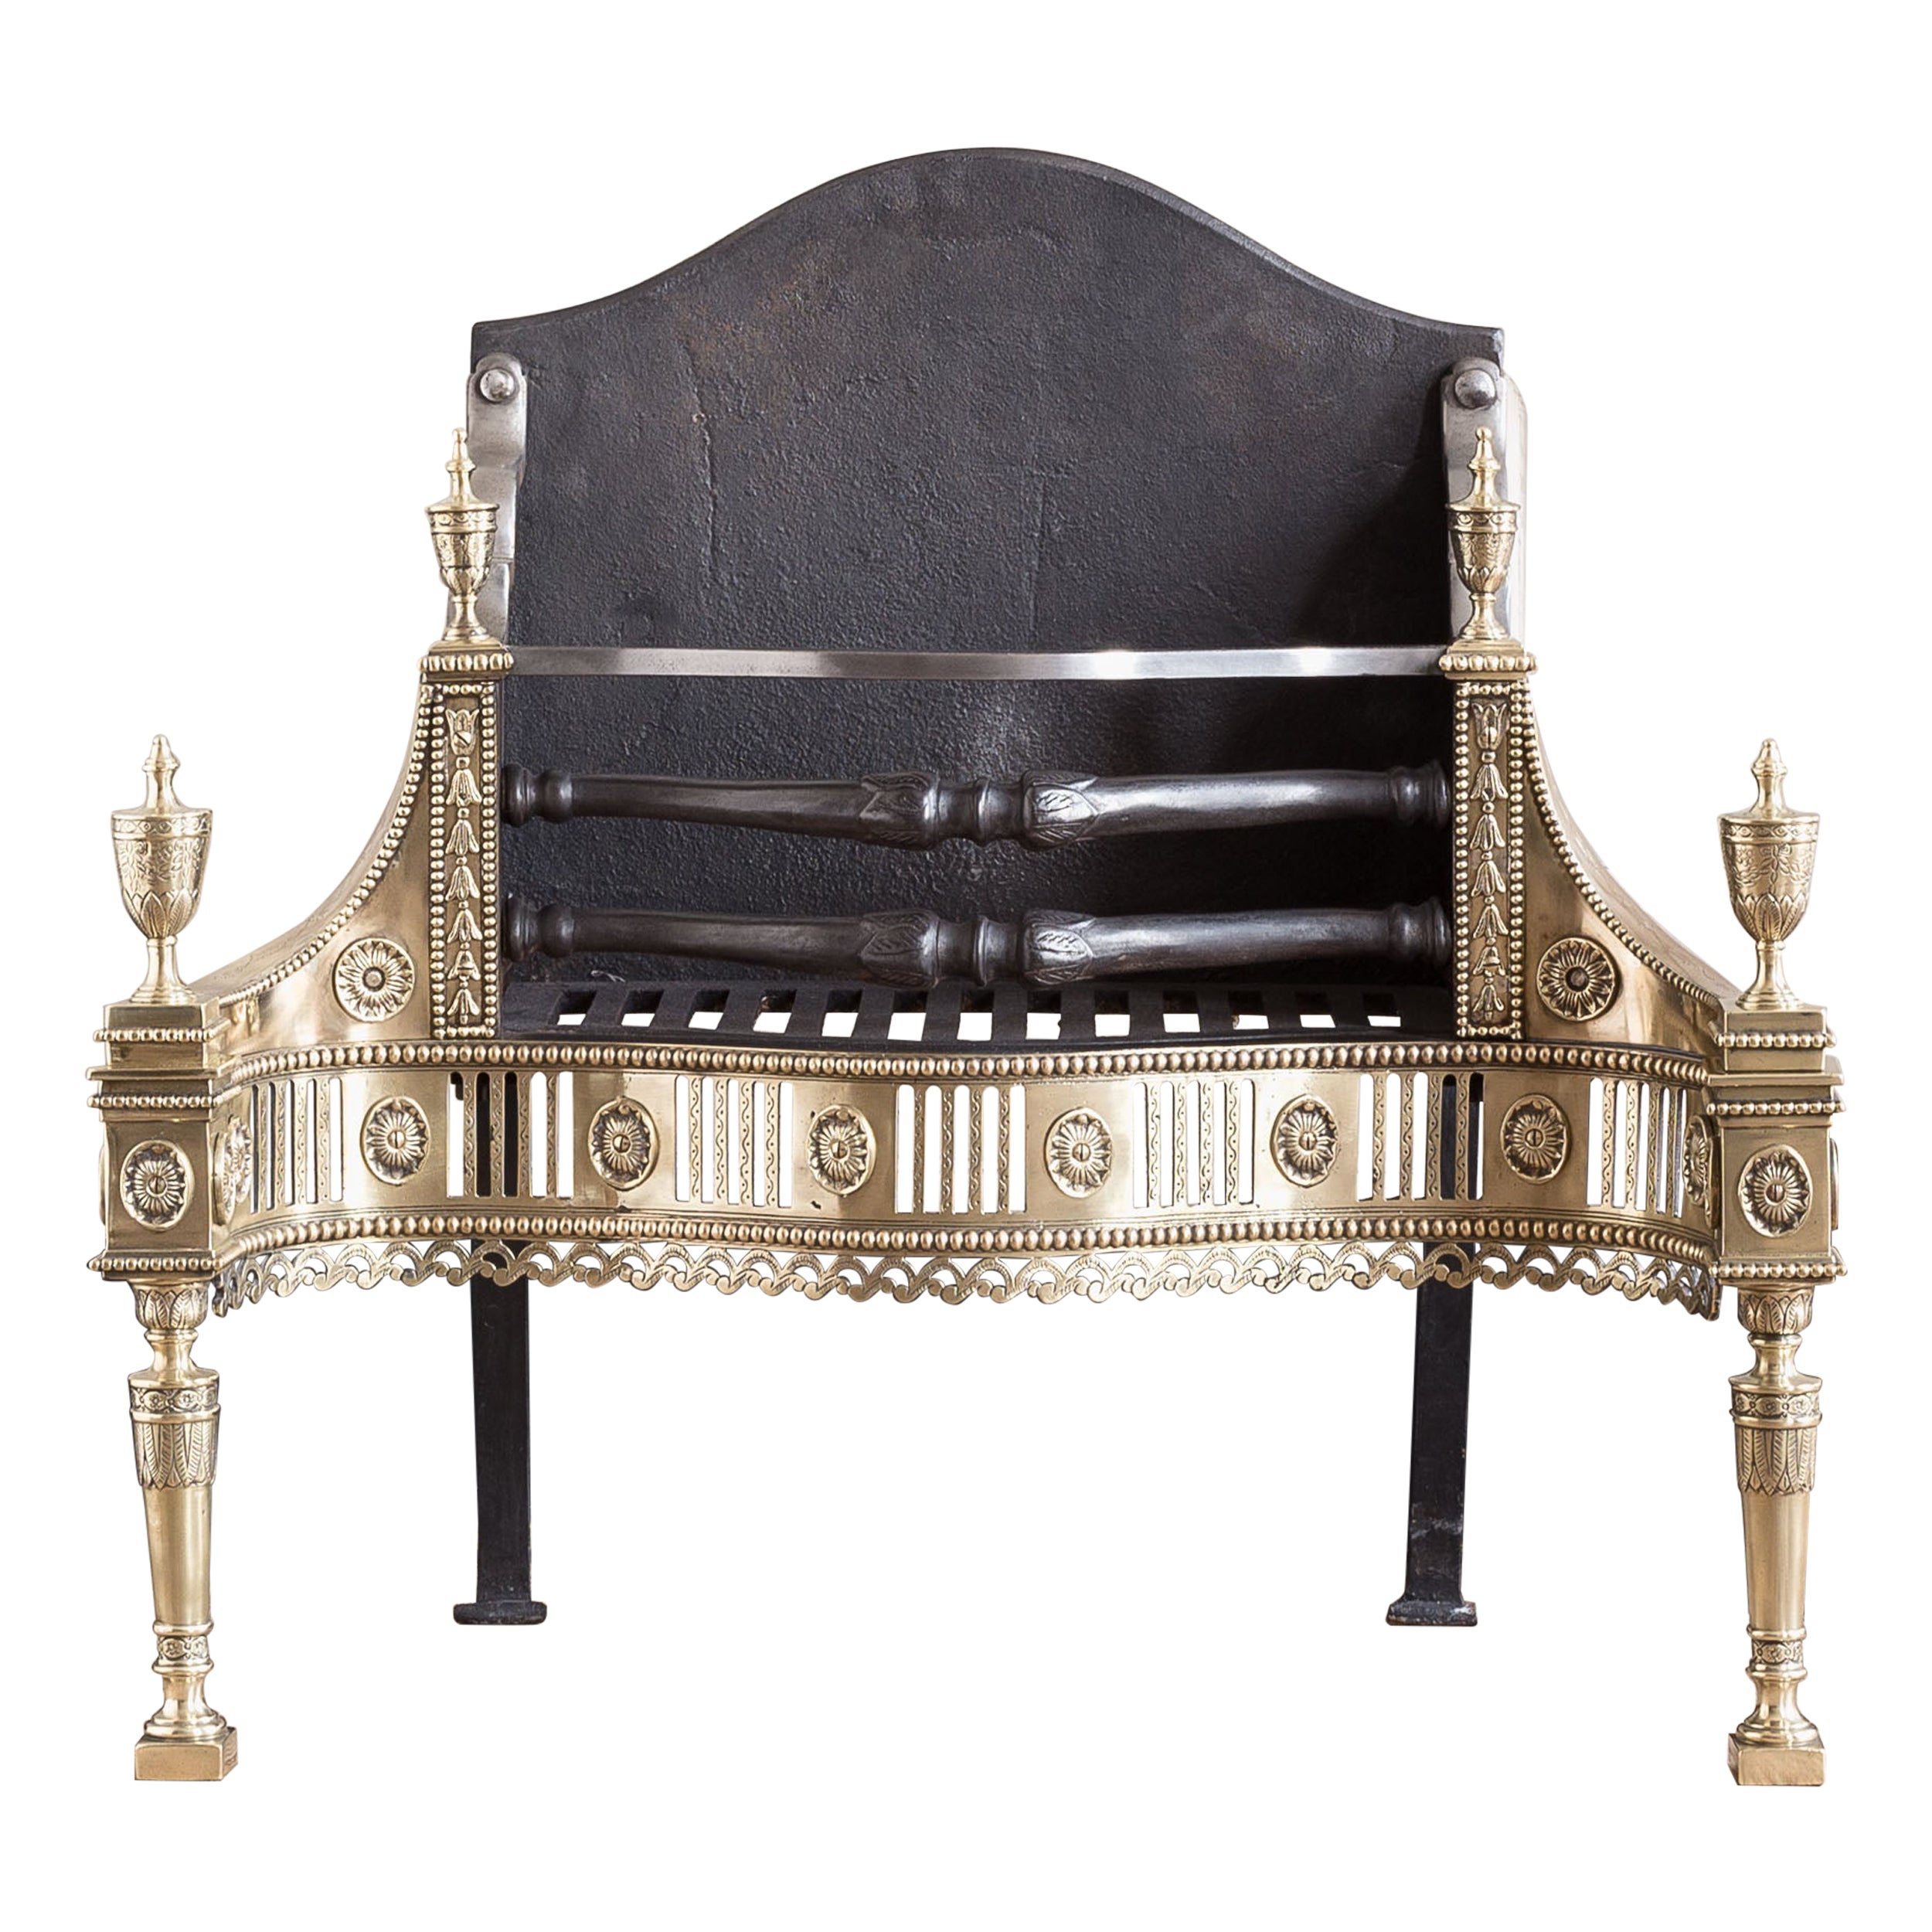 English Neo-Classical Brass and Iron Fire Basket For Sale